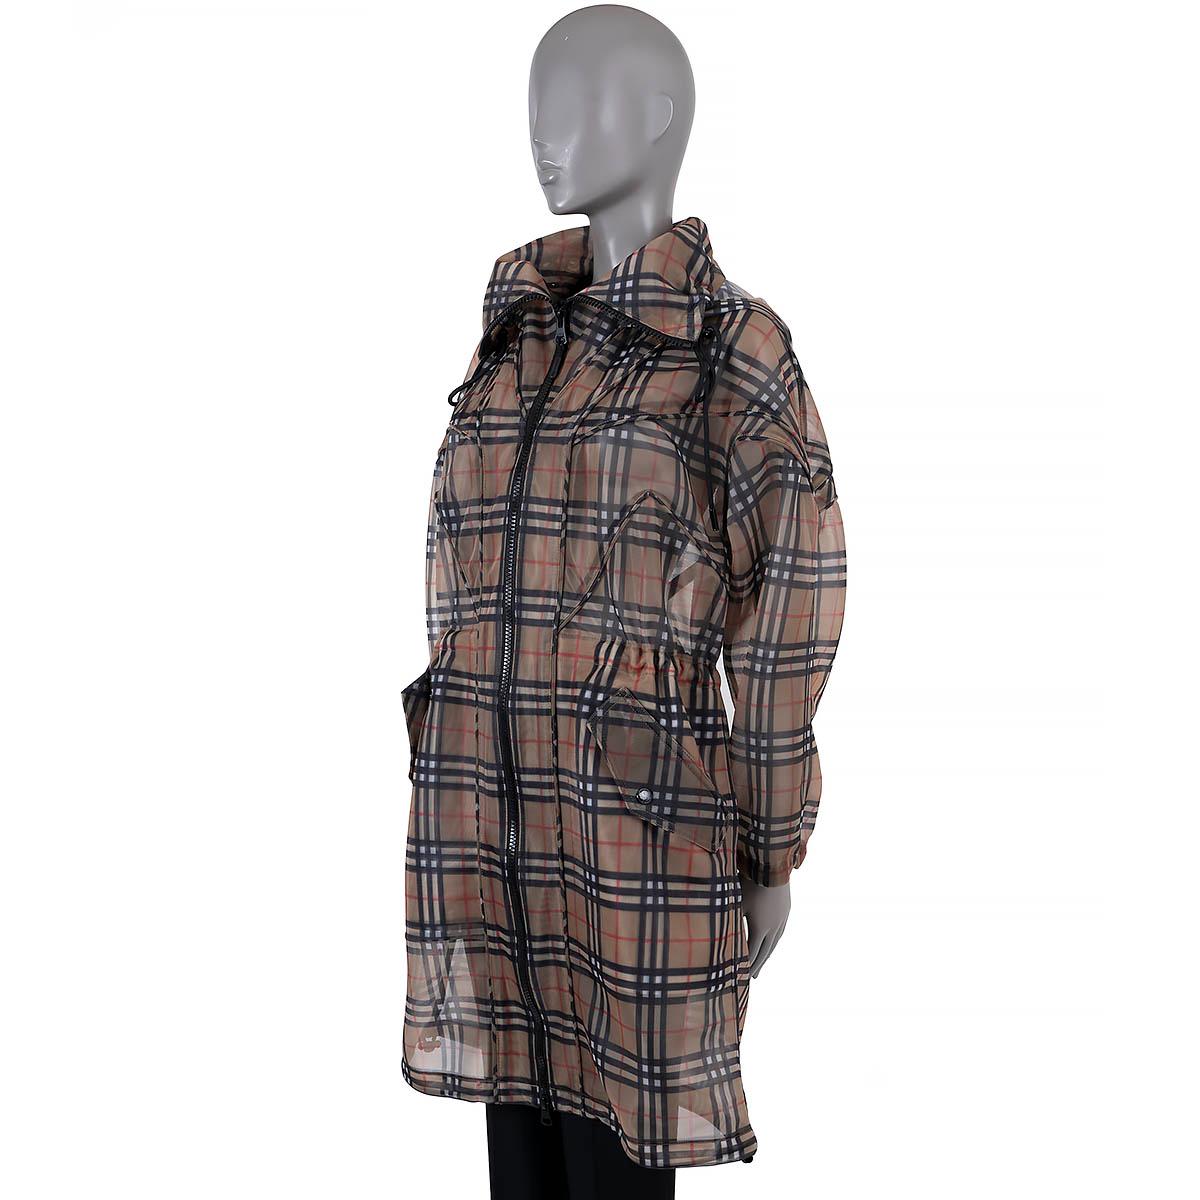 100% authentic Burberry 2021 vintage check mesh parka in Archive Beige, black and red polyester (100%). Closes on the front with a zipper. Features two pockets on the front and a hood with a drawstring. Closes on the front with a black zipper and a